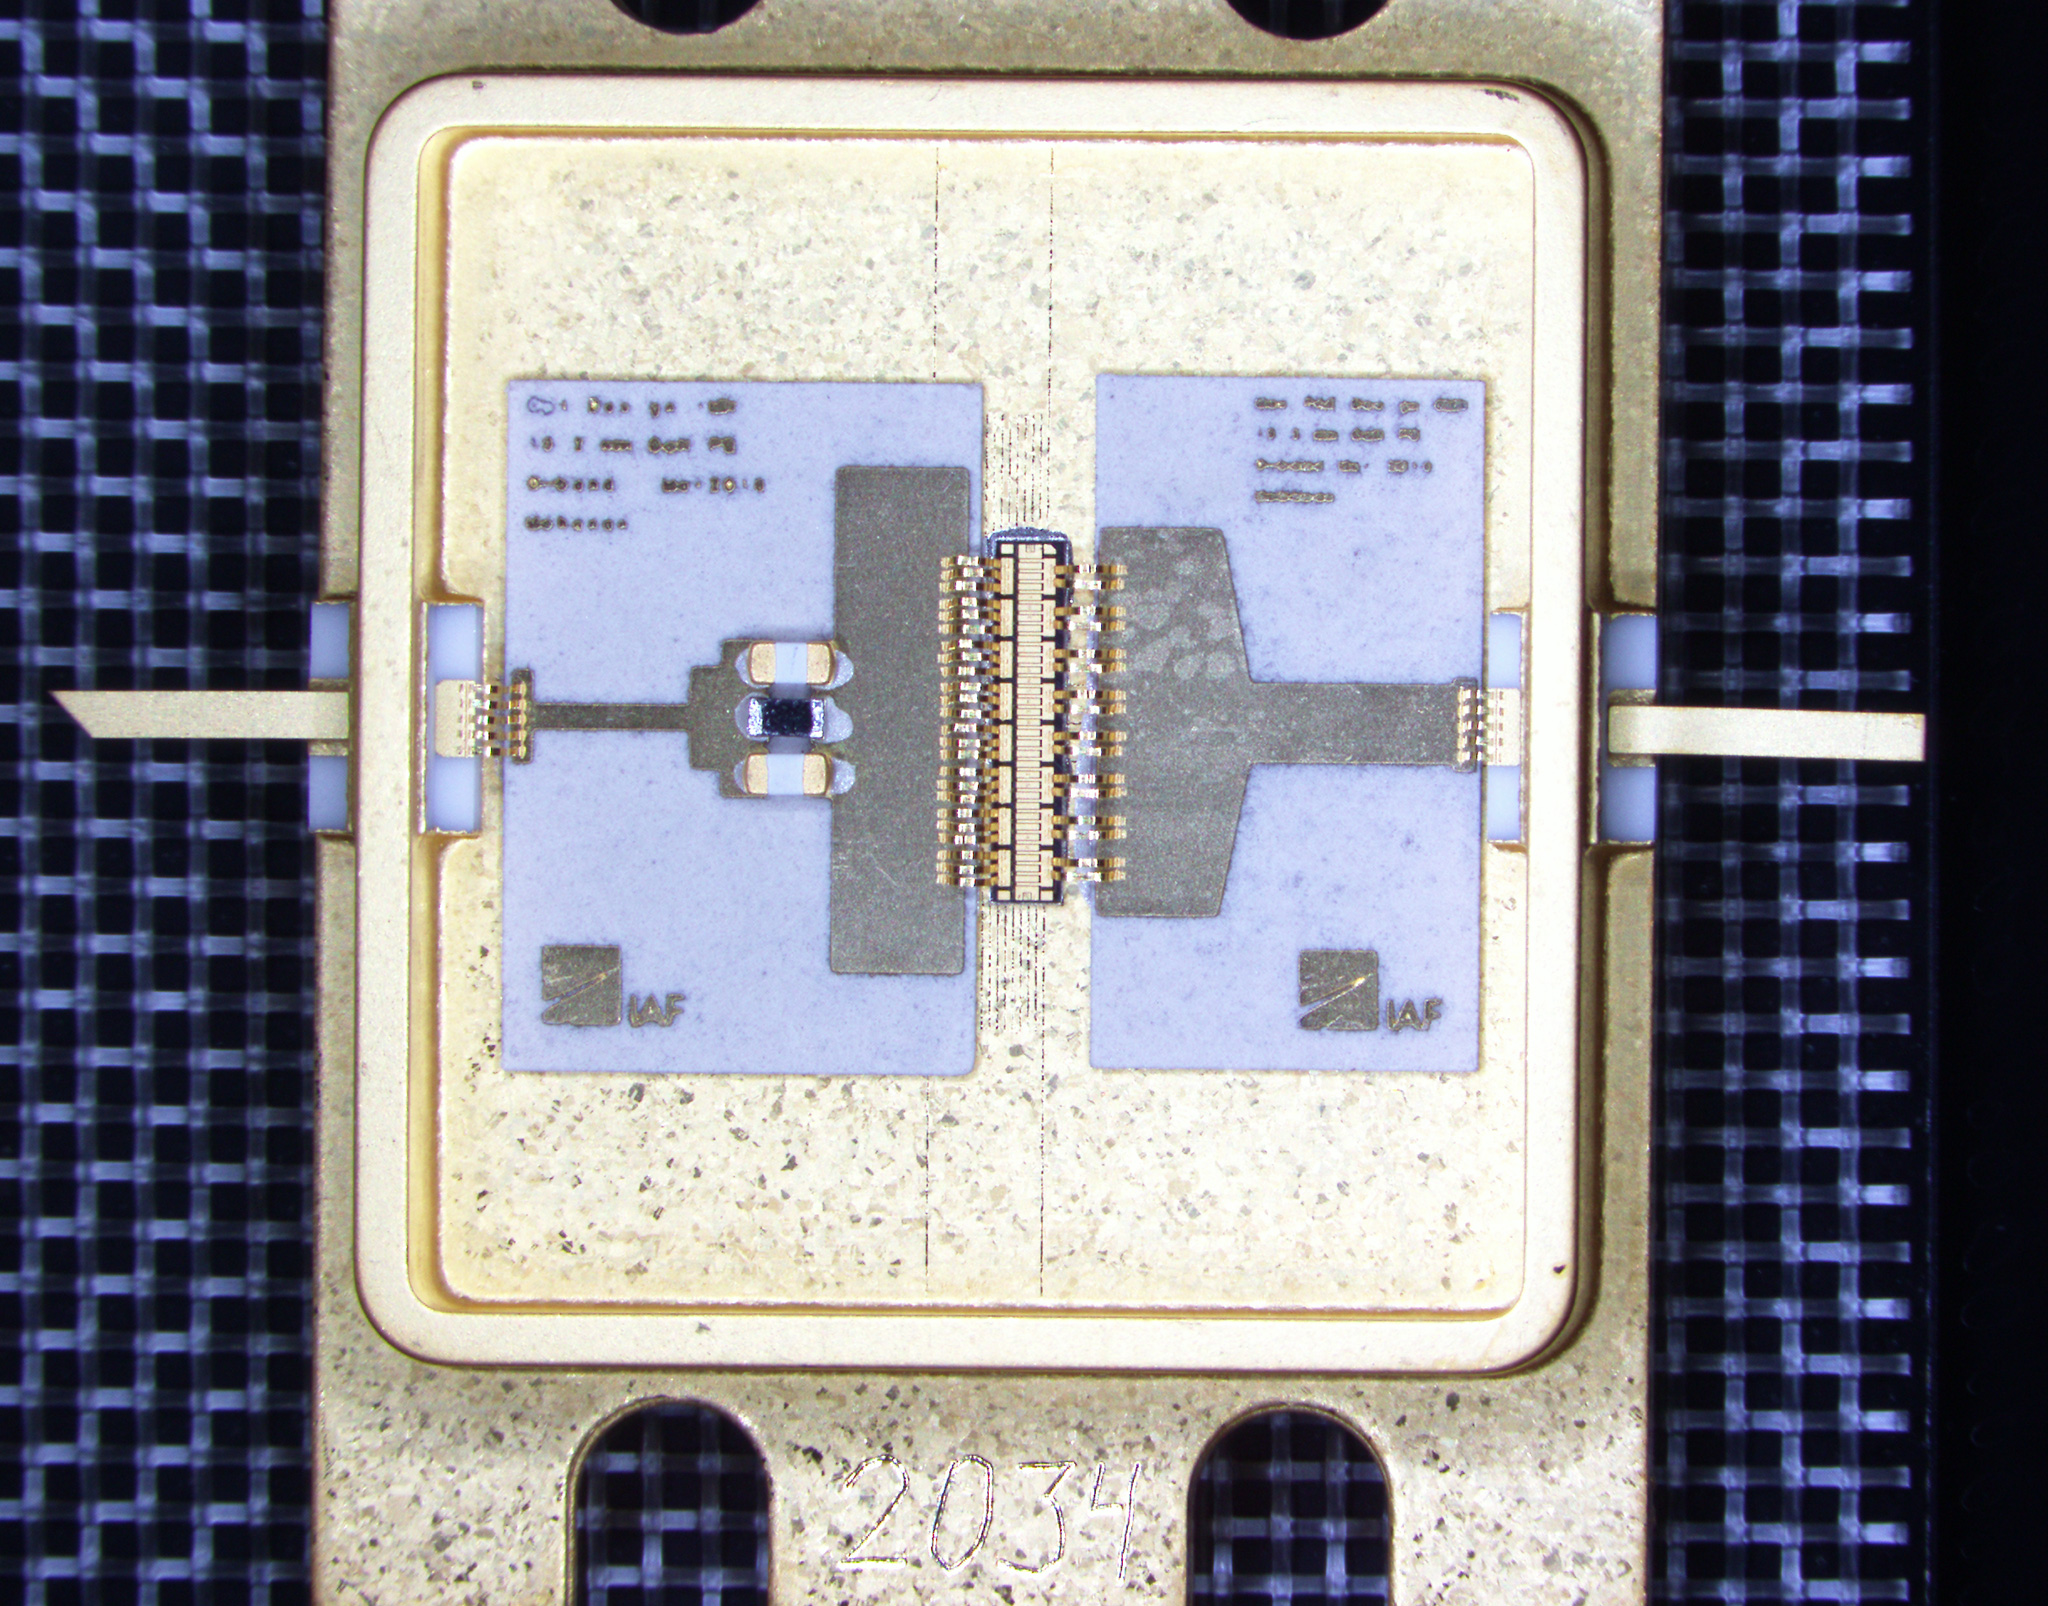 The power amplifier of the Fraunhofer IAF transmits at a frequency of 5.8 gigahertz. These frequency is needed for the new 5G mobile radio standard. The centrally placed gallium nitride (GaN) semi-conductor circuits are the central part of the packaged power amplifier.